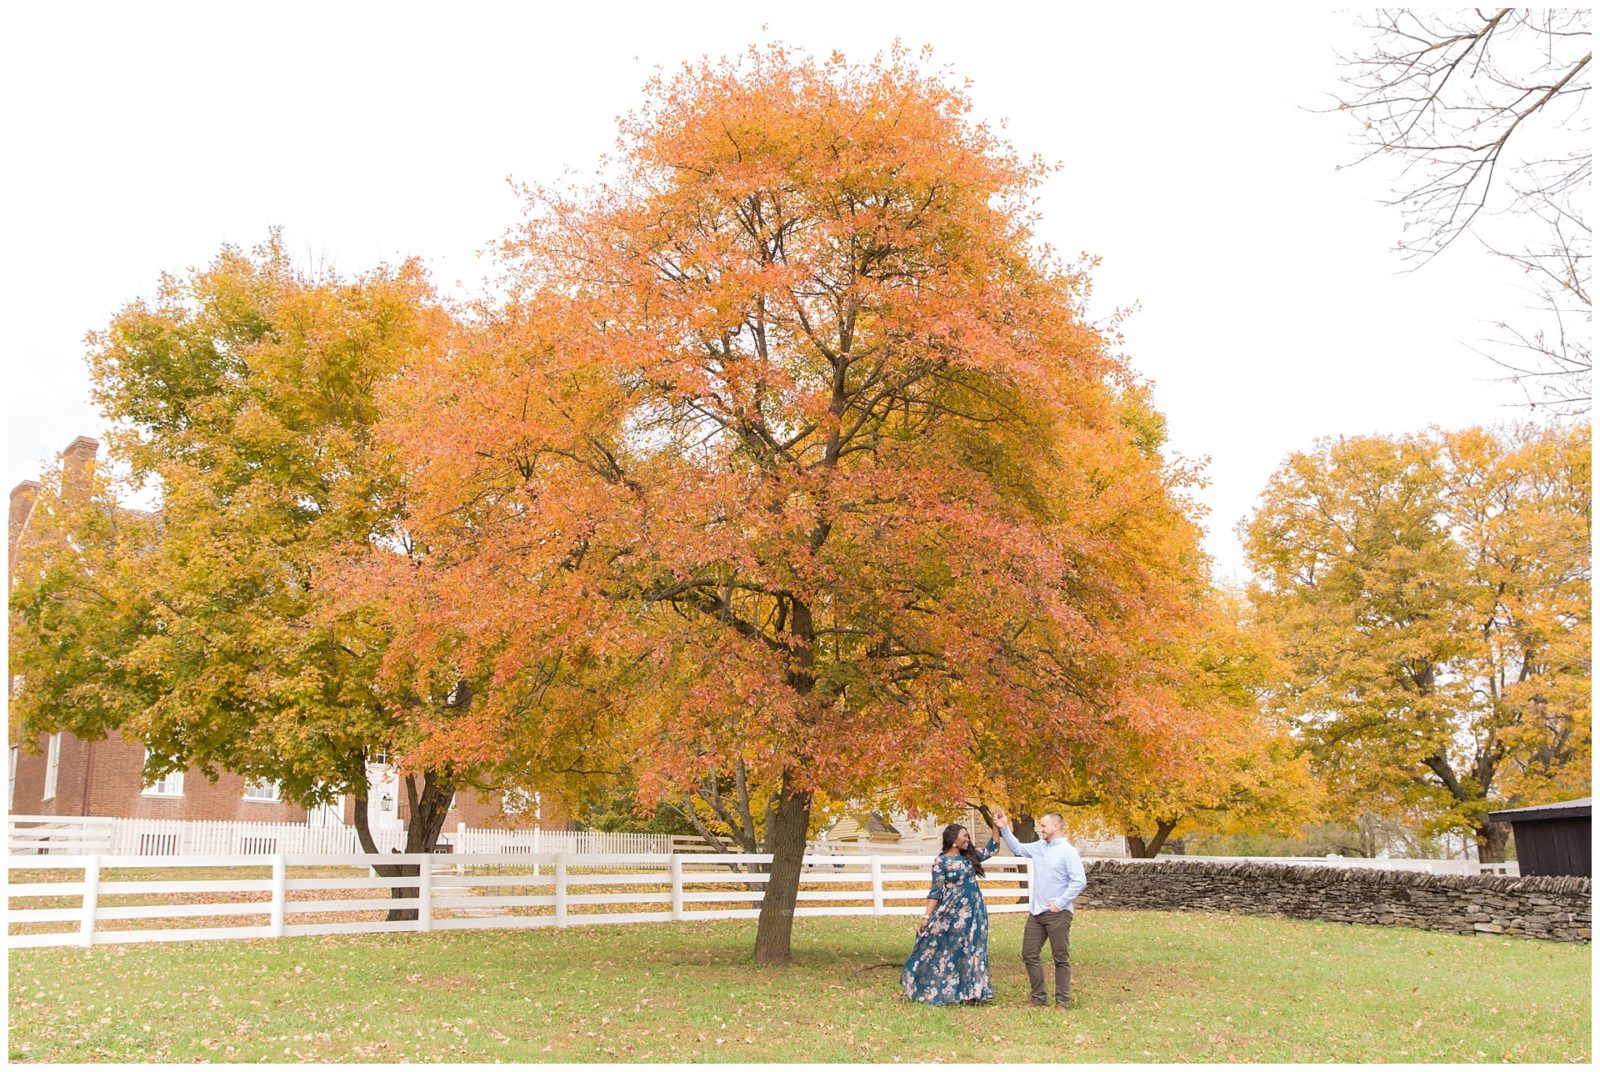 Fall engagement session with fall colors at Shaker Village in Harrodsburg, Kentucky.